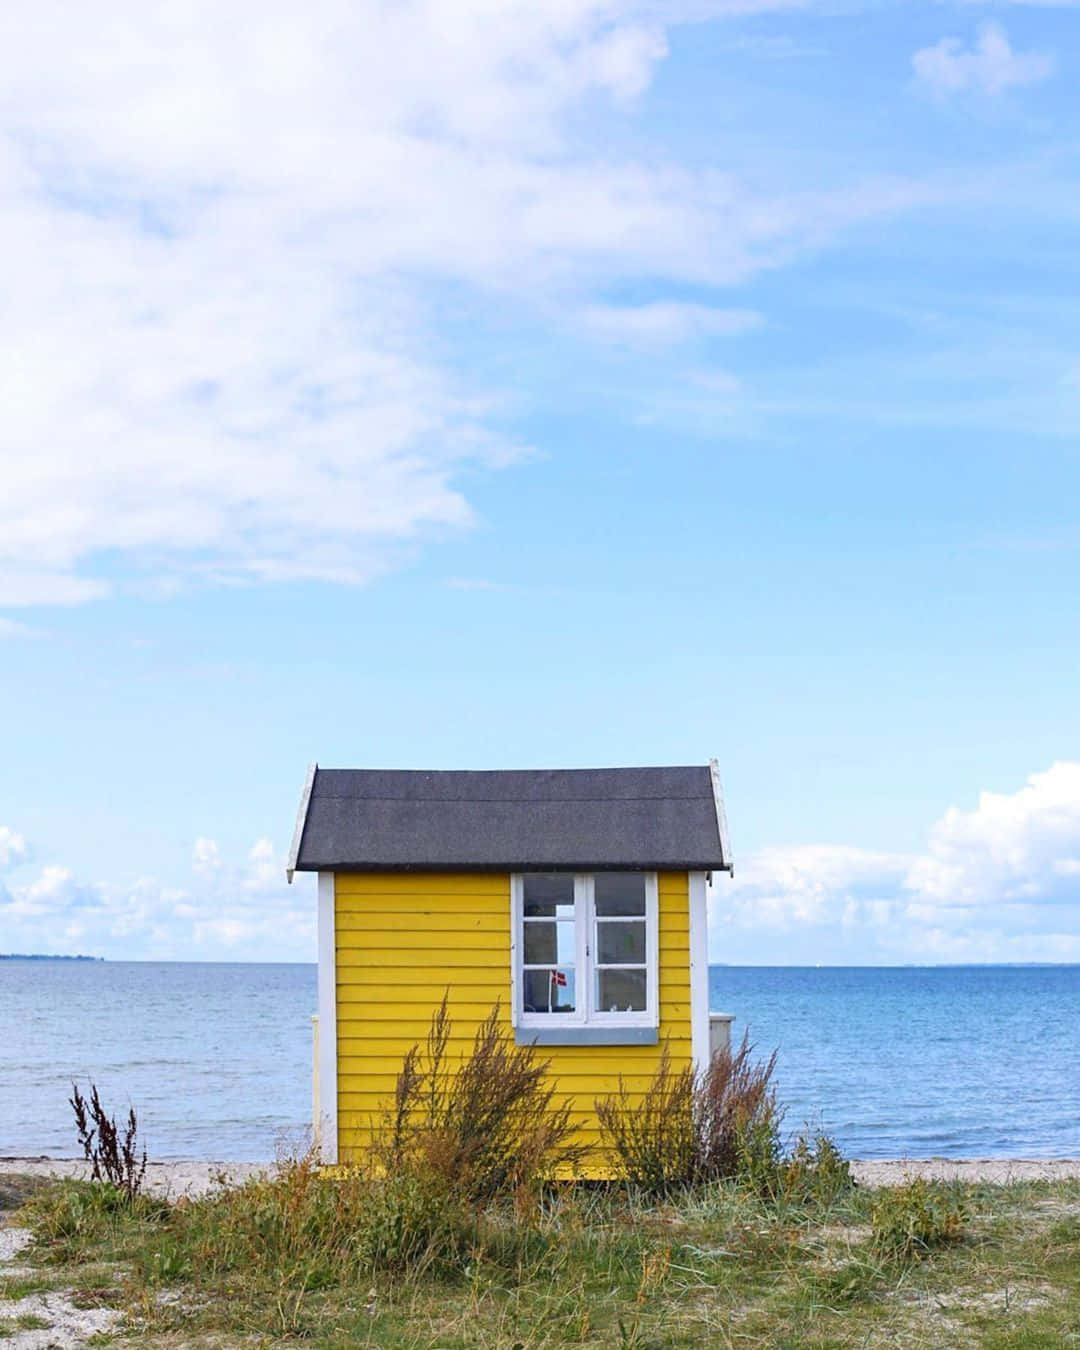 A Yellow Beach Hut Sits On The Shore